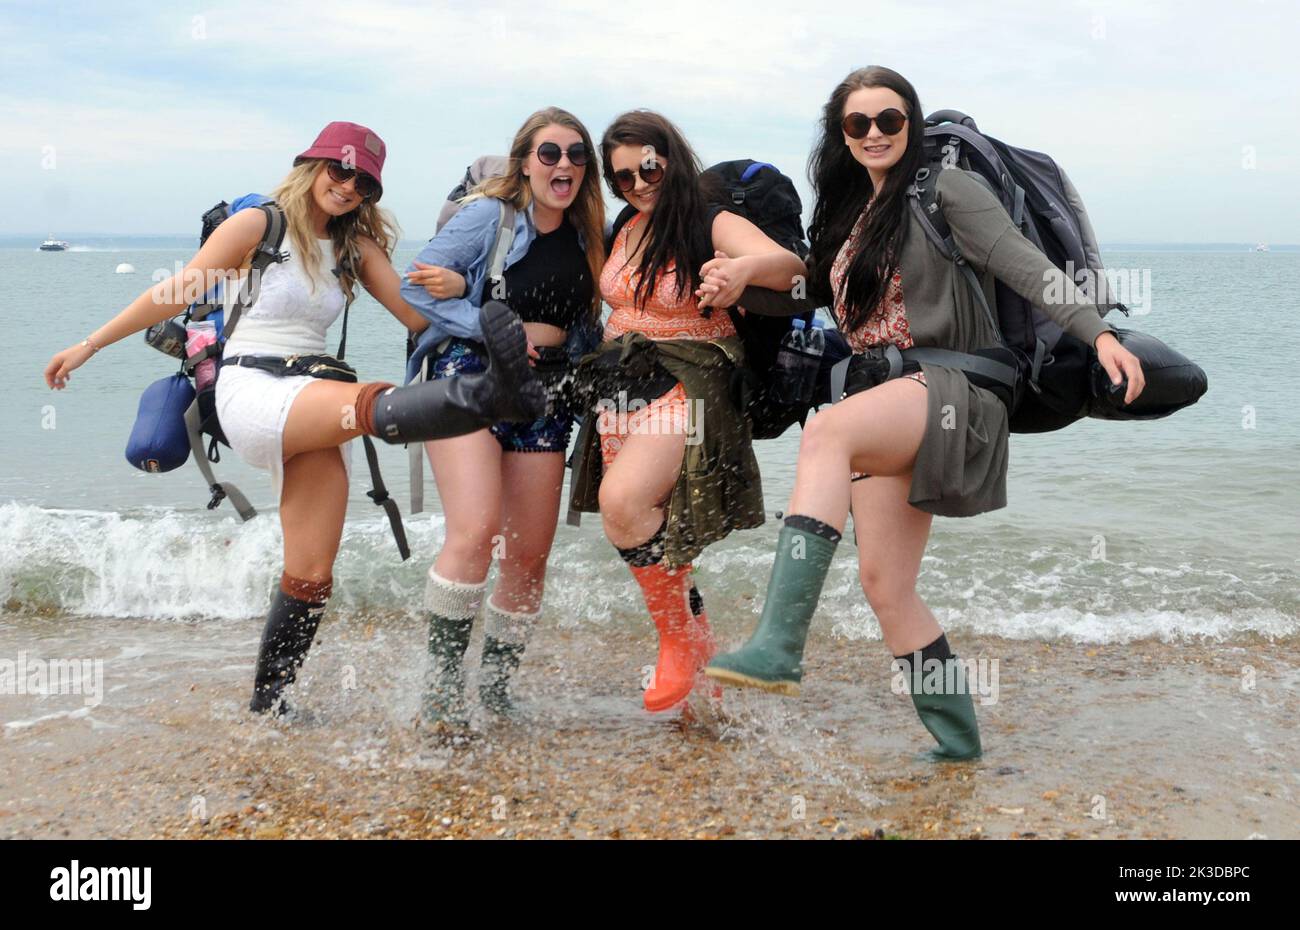 Hi jinks for music fans on the beach at Southsea  left to right, Megan Tiltman, Maddie, Presdee, Becky Martin and Grace |Harris as they wait for the Isle of Wight hovercraft to take them to tne Isle of Wight Music Festival, Pic Mike Walker, Mike Walker Pictures,2015 Stock Photo